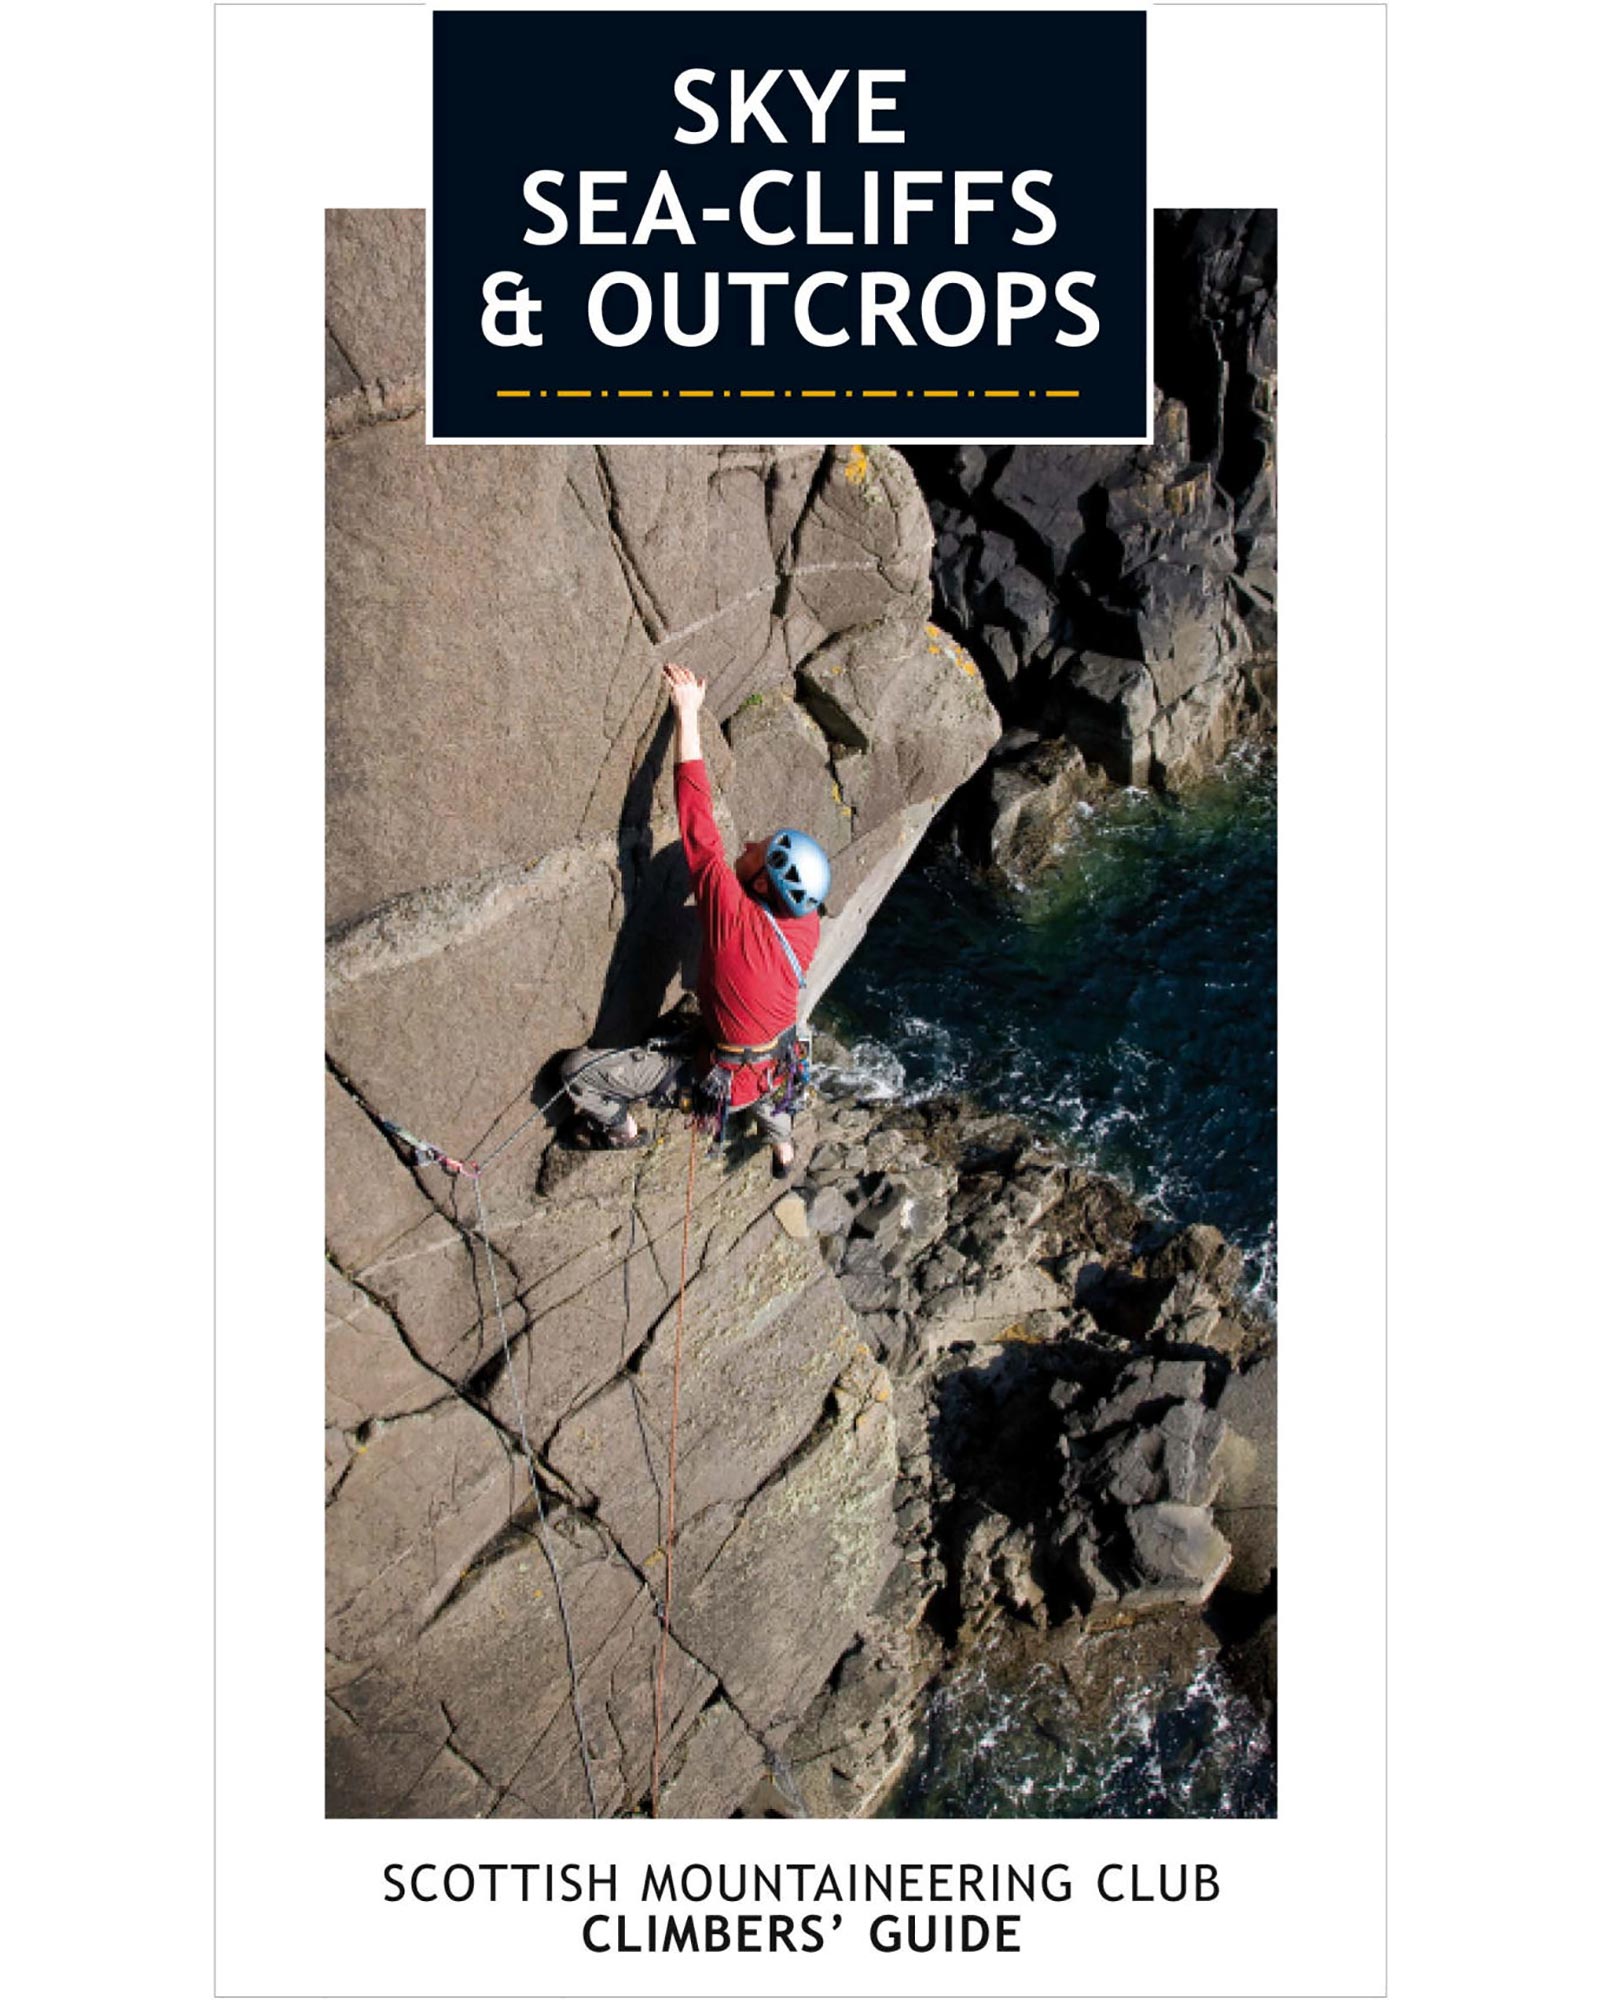 Scottish Mountaineering Club Skye - Sea-cliffs And Outcrops (smc) Guide Book